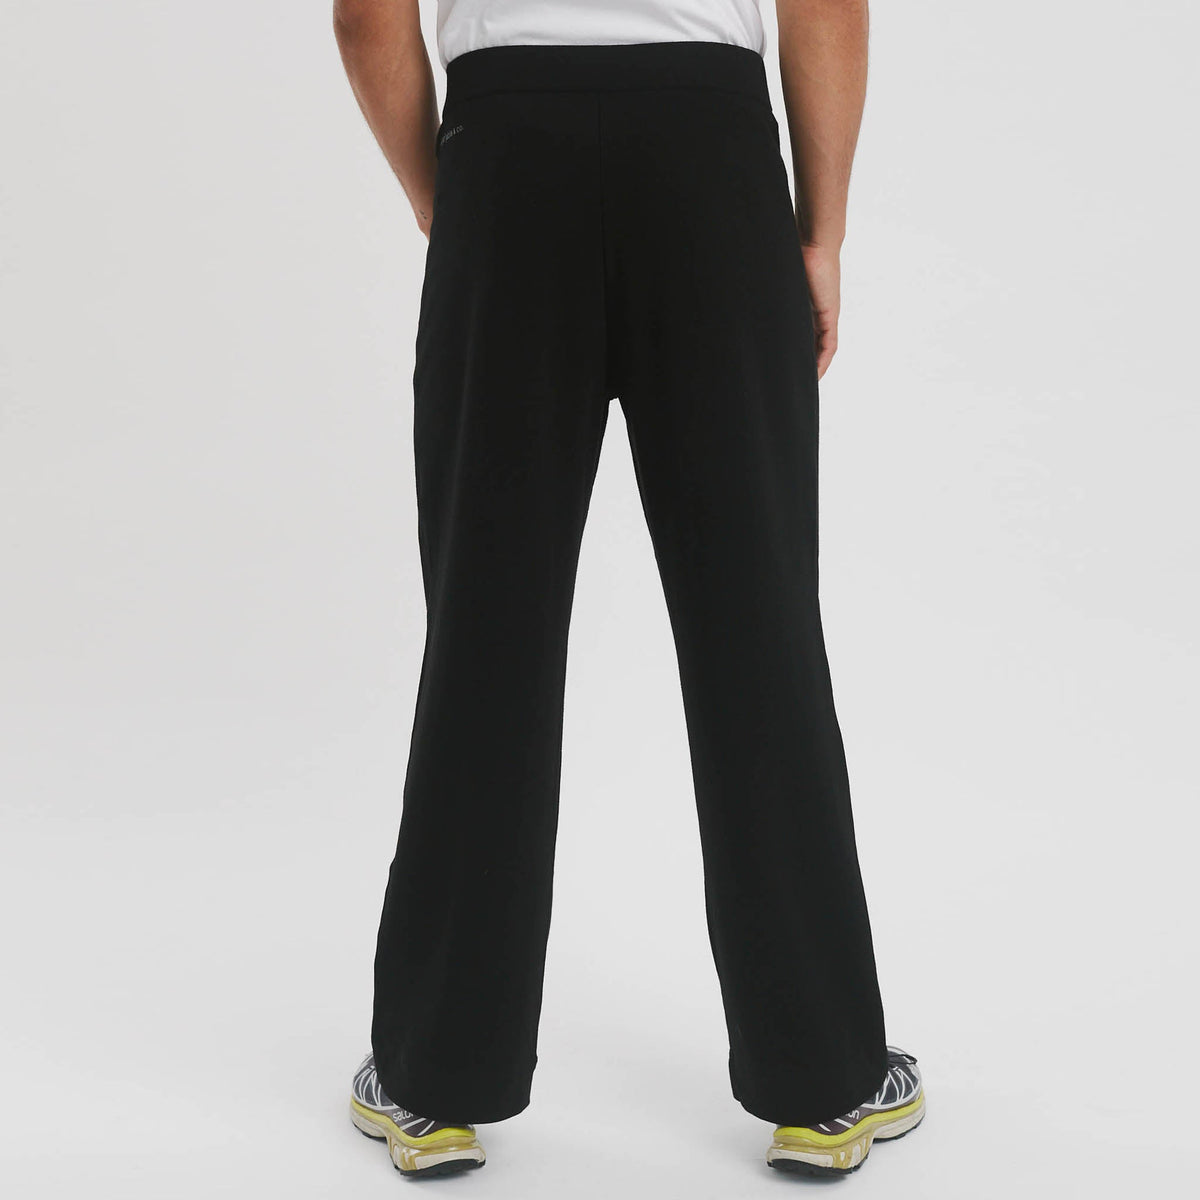 The Comfy Pants-Mens. No tags, no lables. The Shapes United